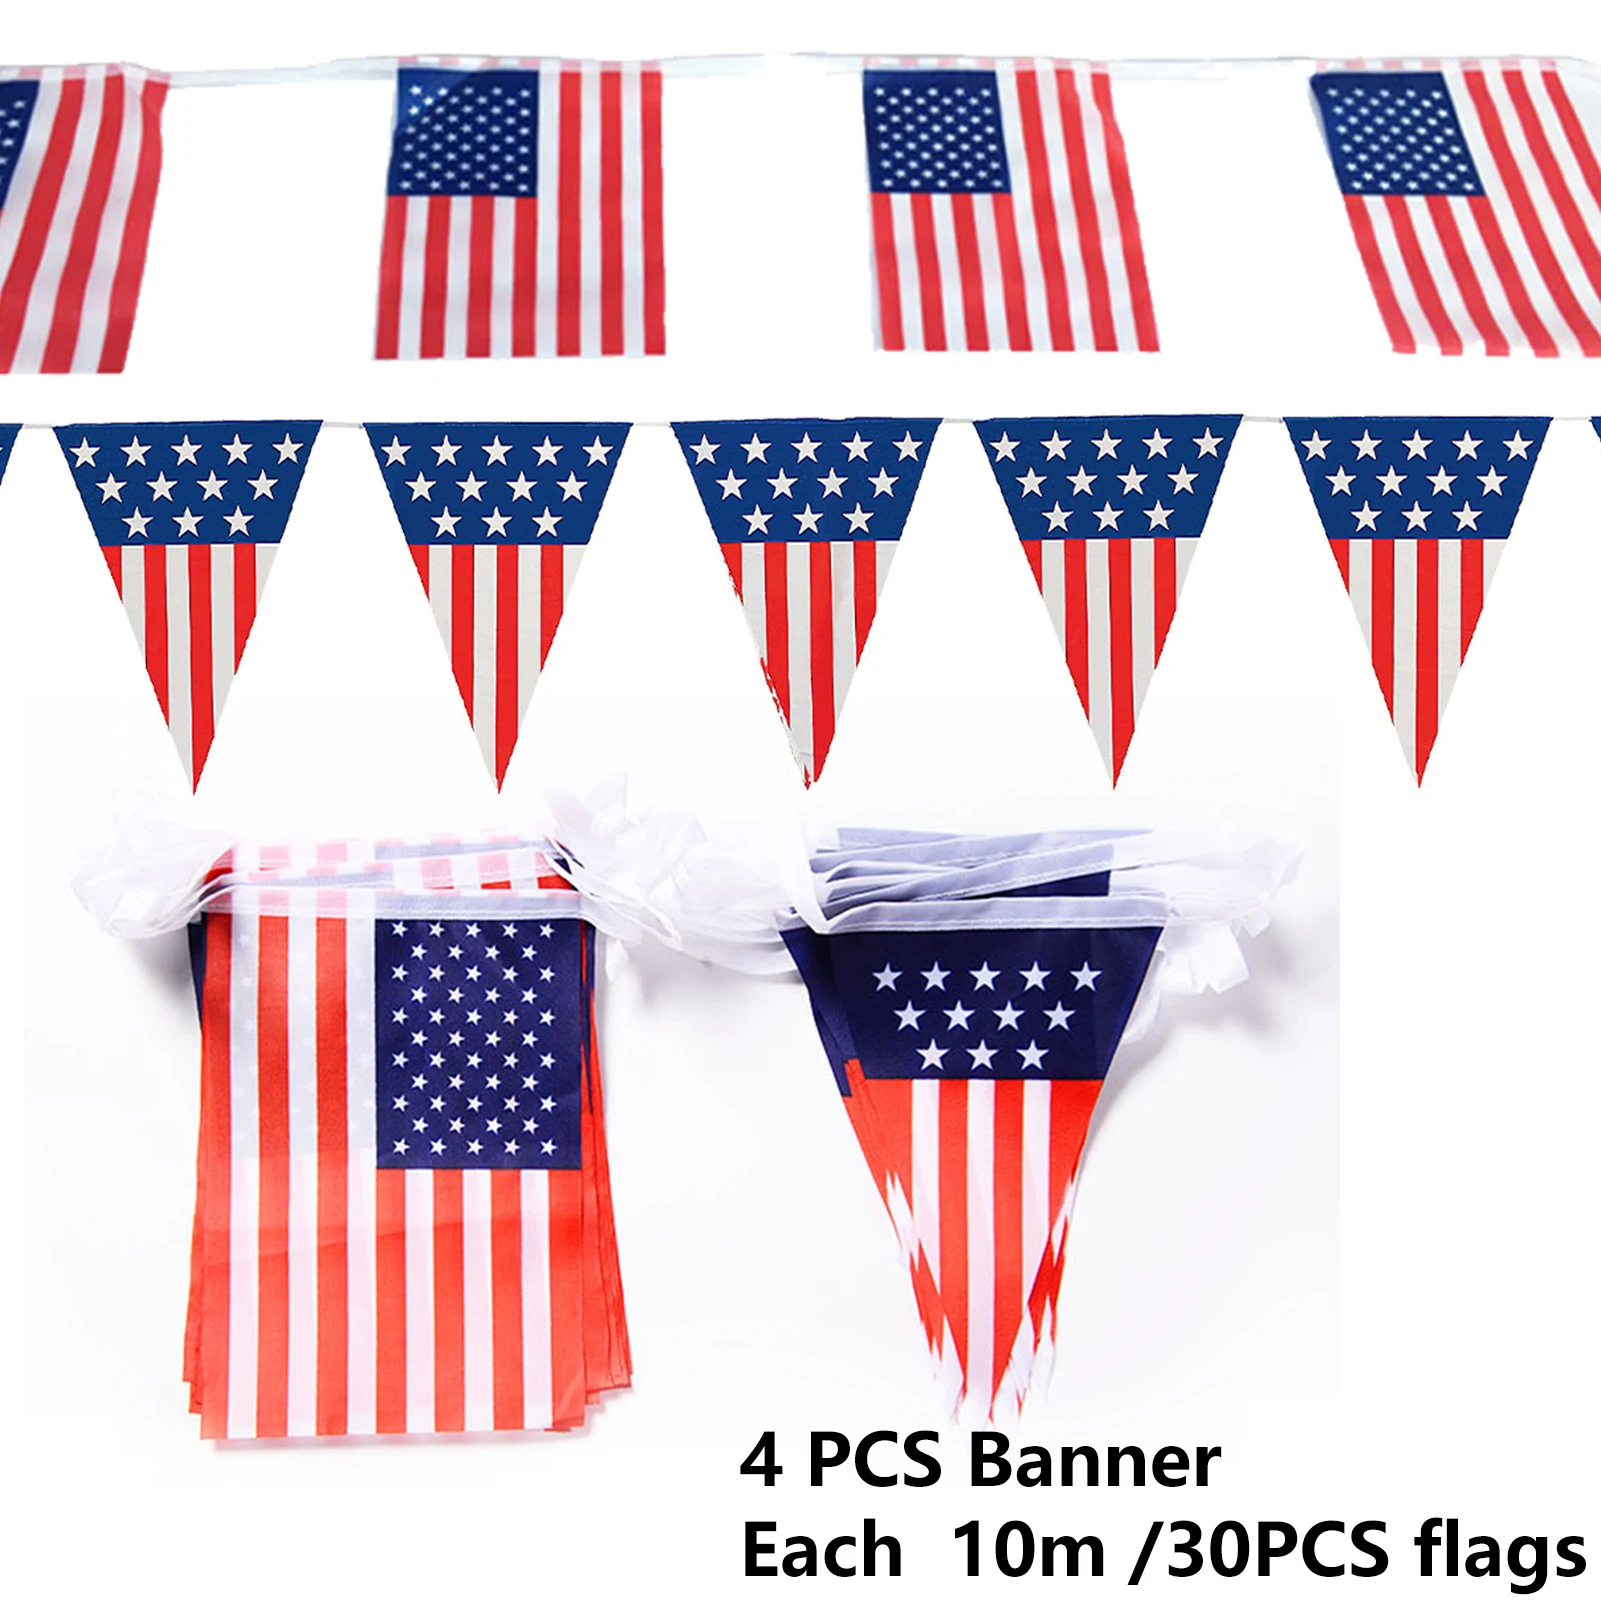 

4pcs Polyester Square Triangle Small Exquisite Bunting Banner Festive American Flag Party Decorations String Independence Day